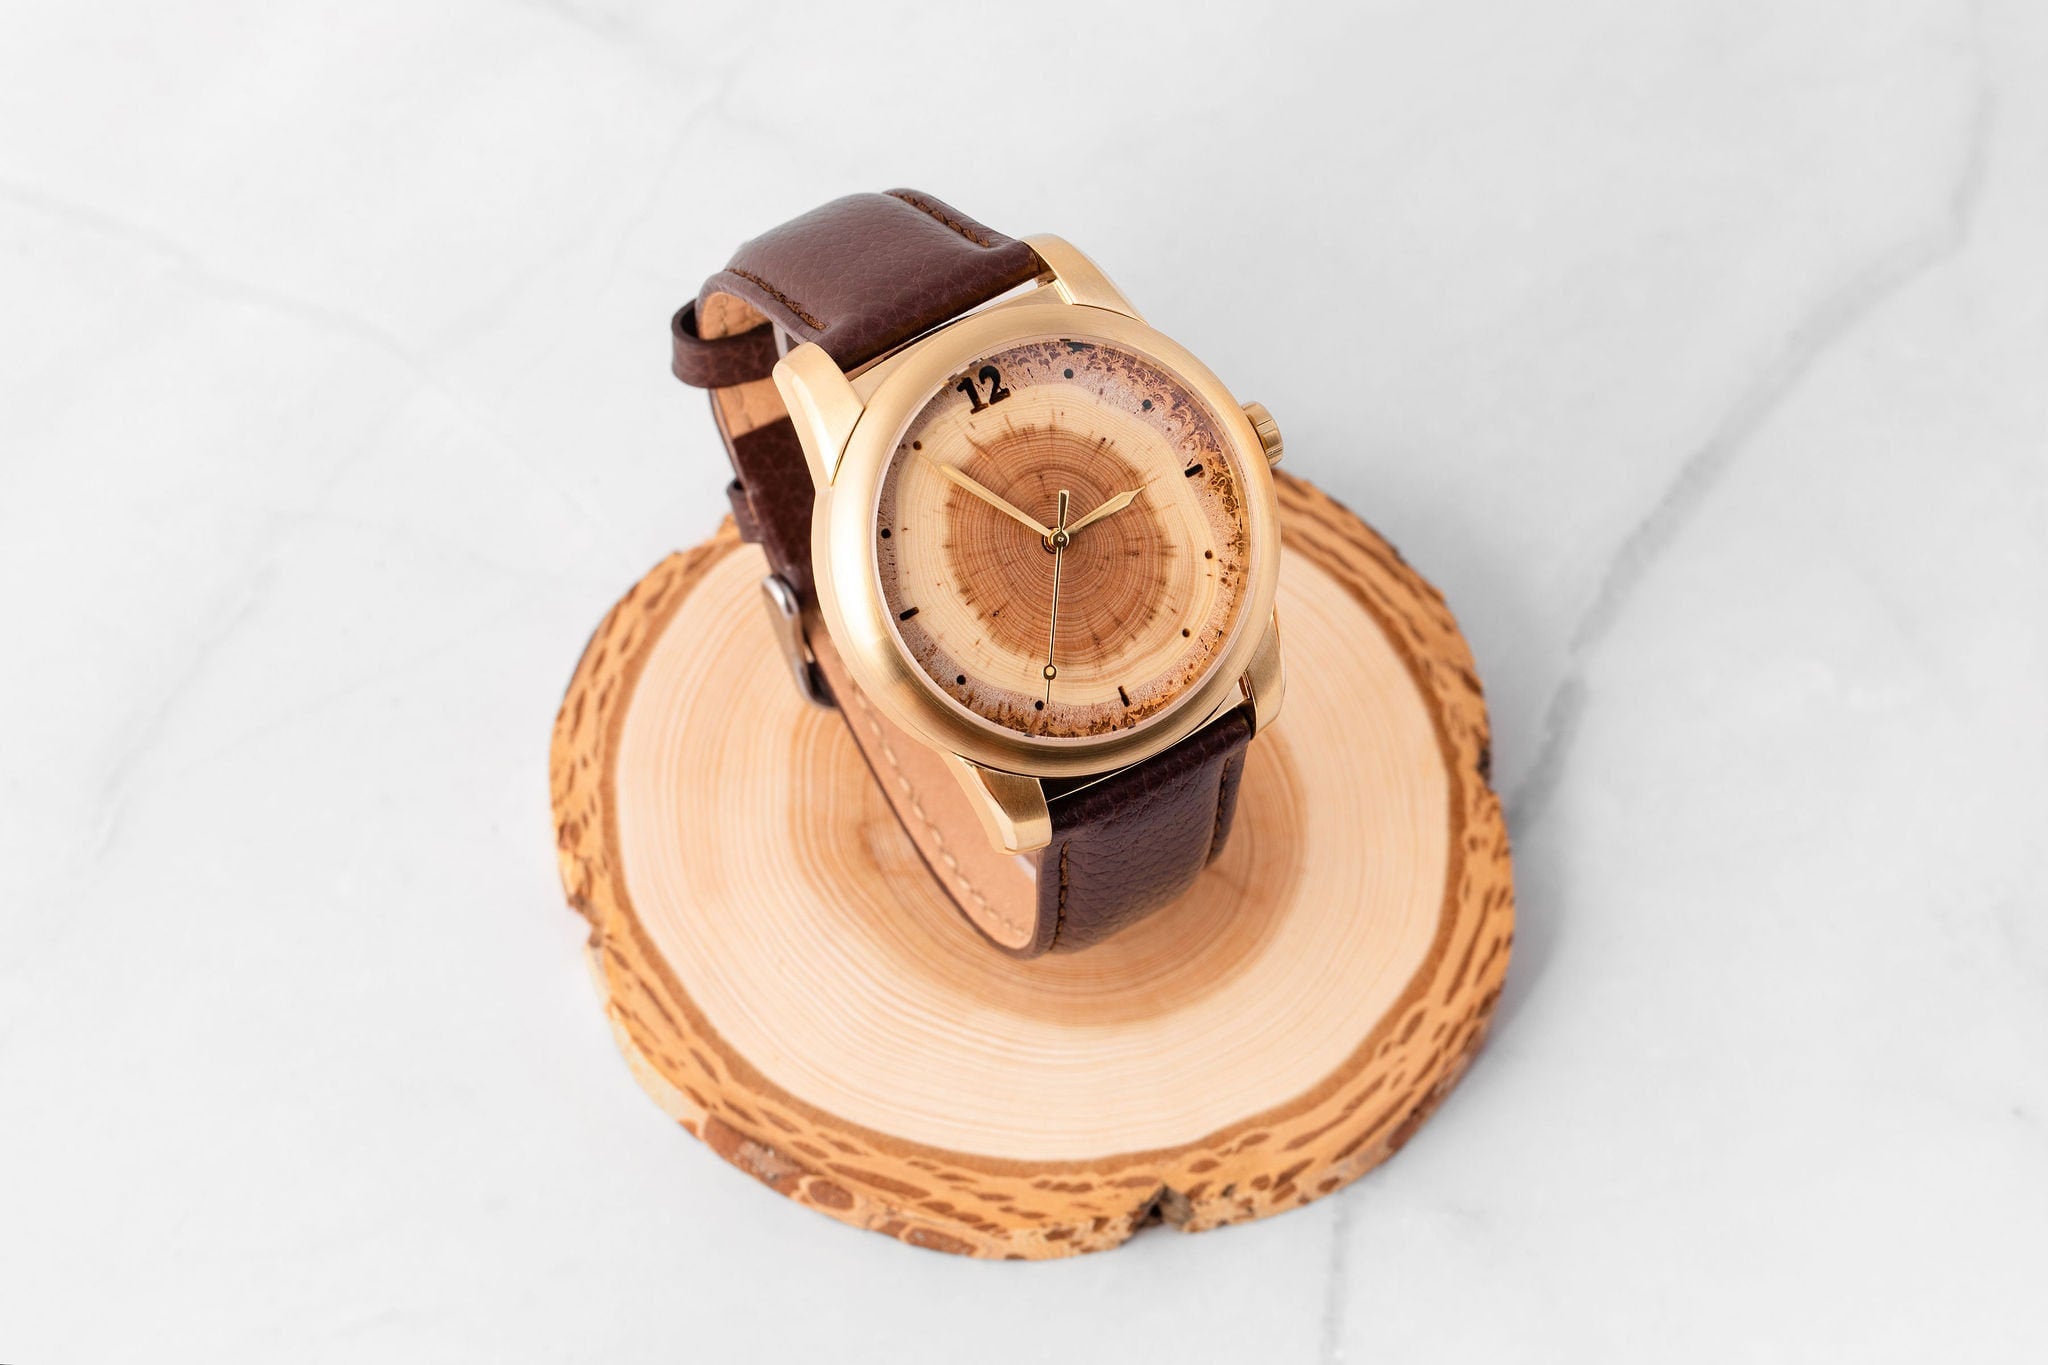 Men's wood watch made of Tree Rings birthday or anniversary Gift. Customize the number of annual tree rings to match recipients birth year.